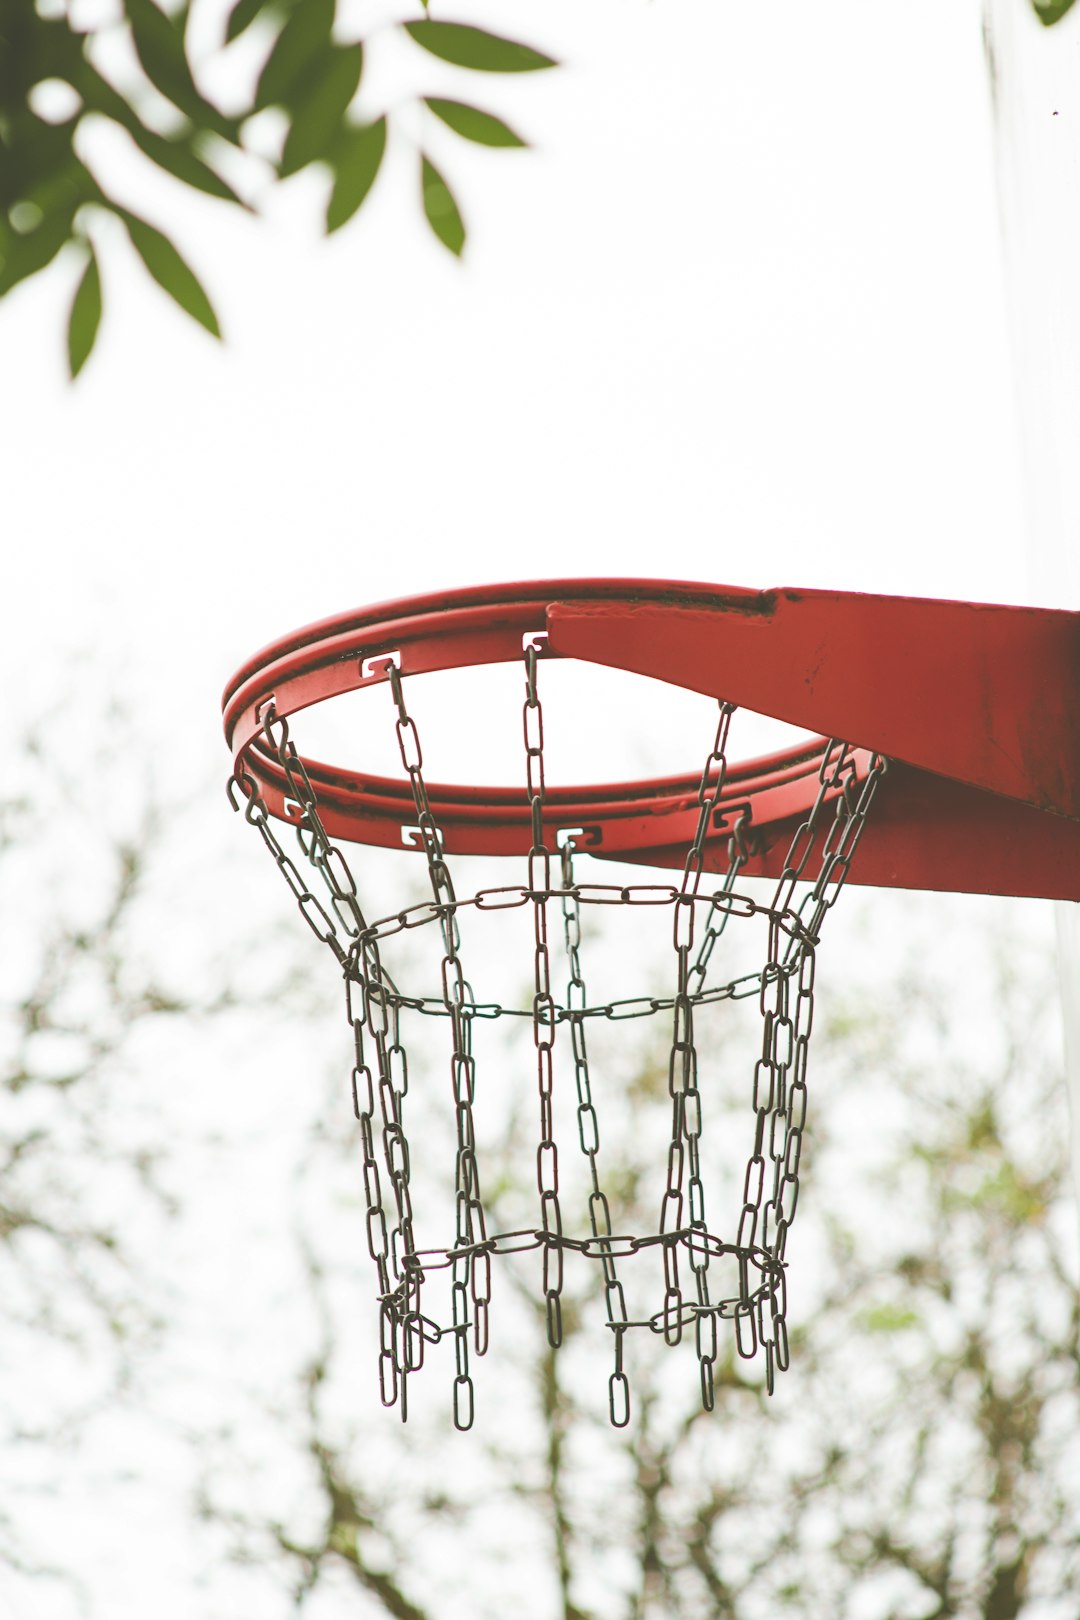 red basketball ring